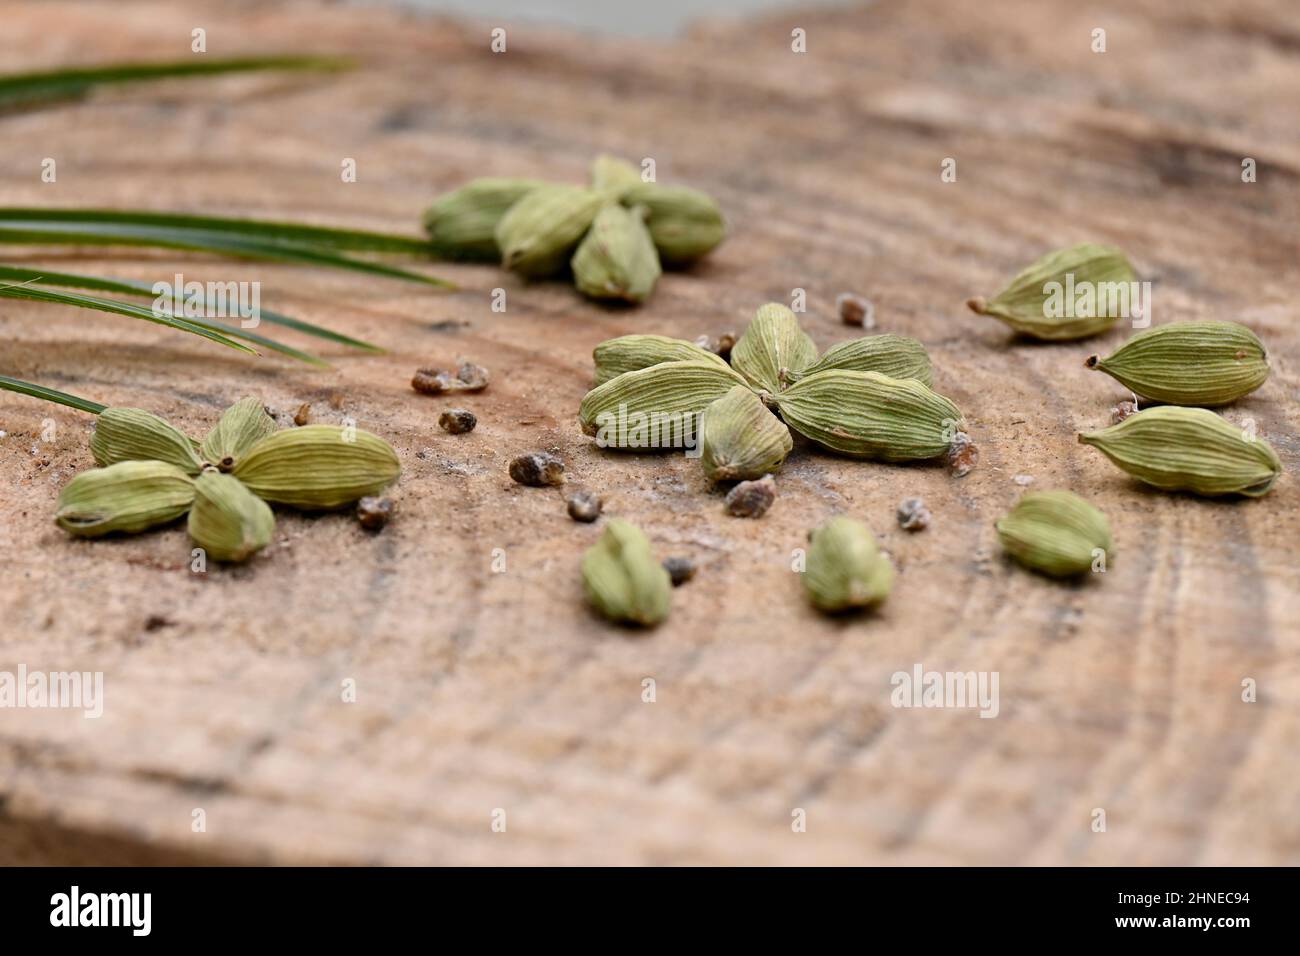 closeup the bunch green ripe cardamom with green leaves over out of focus wooden background. Stock Photo